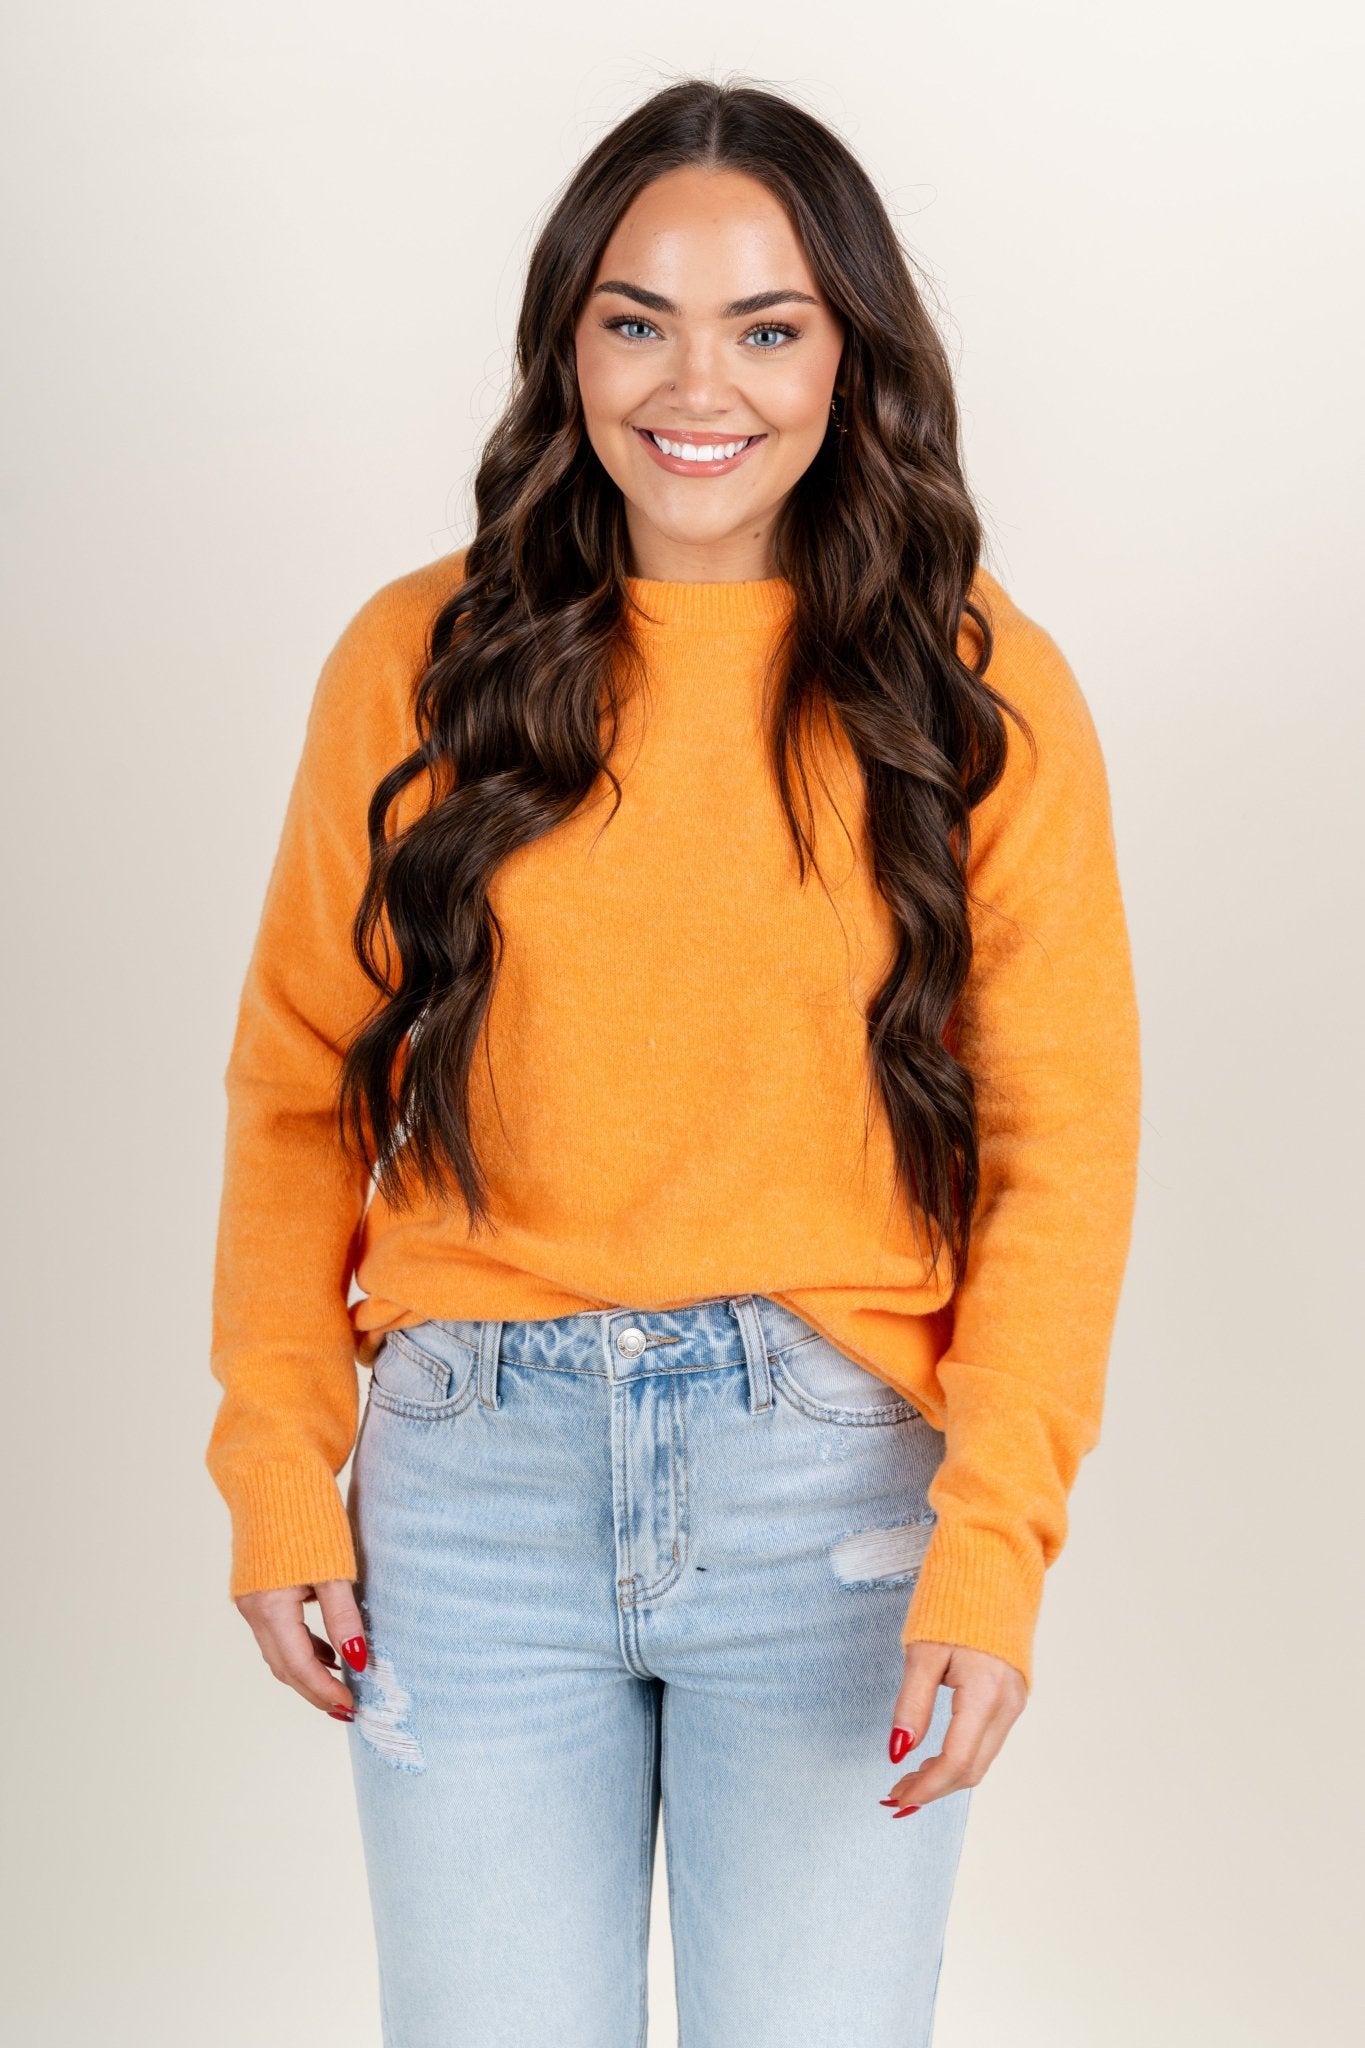 Z Supply Andrea sweater monarch orange - Z Supply Top - Z Supply Tops, Dresses, Tanks, Tees, Cardigans, Joggers and Loungewear at Lush Fashion Lounge